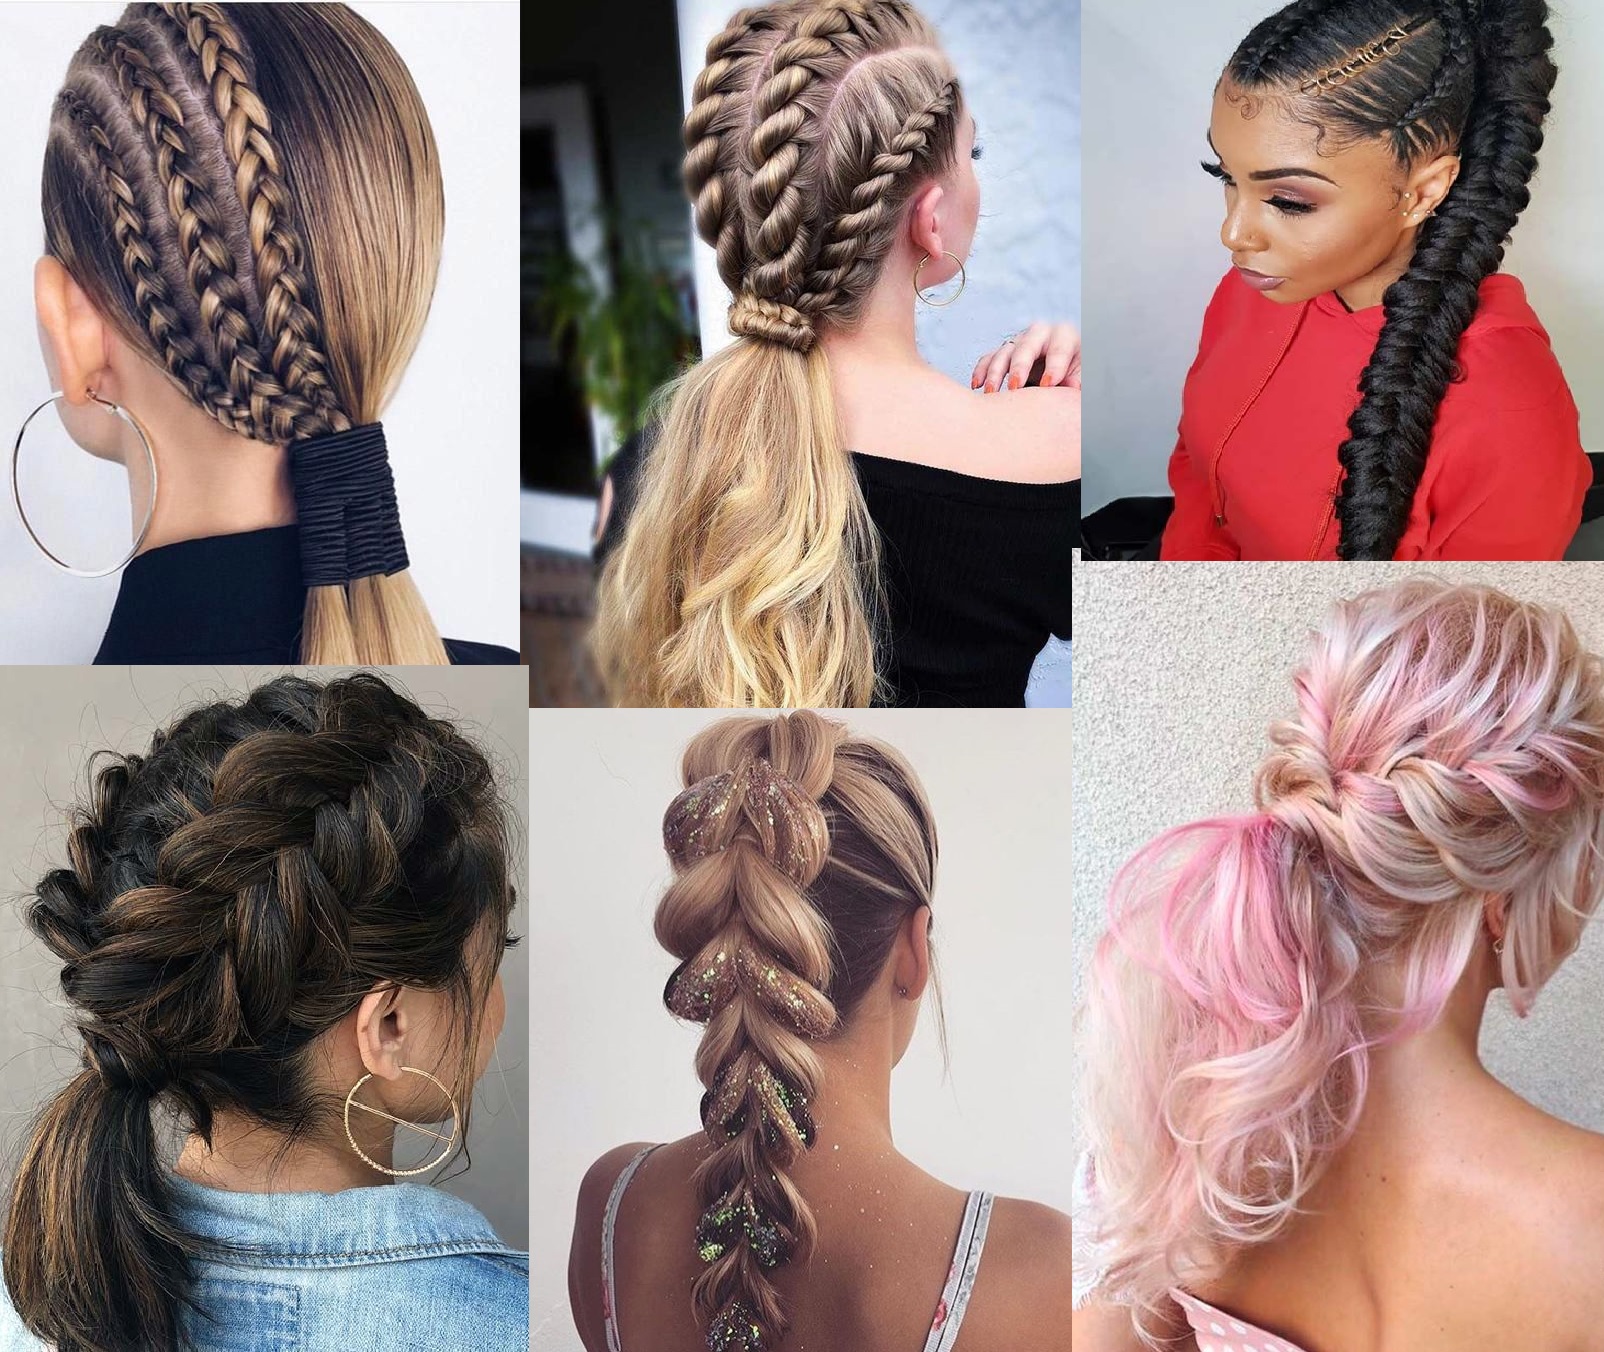 Braided Ponytail Hairstyles You Must Try!